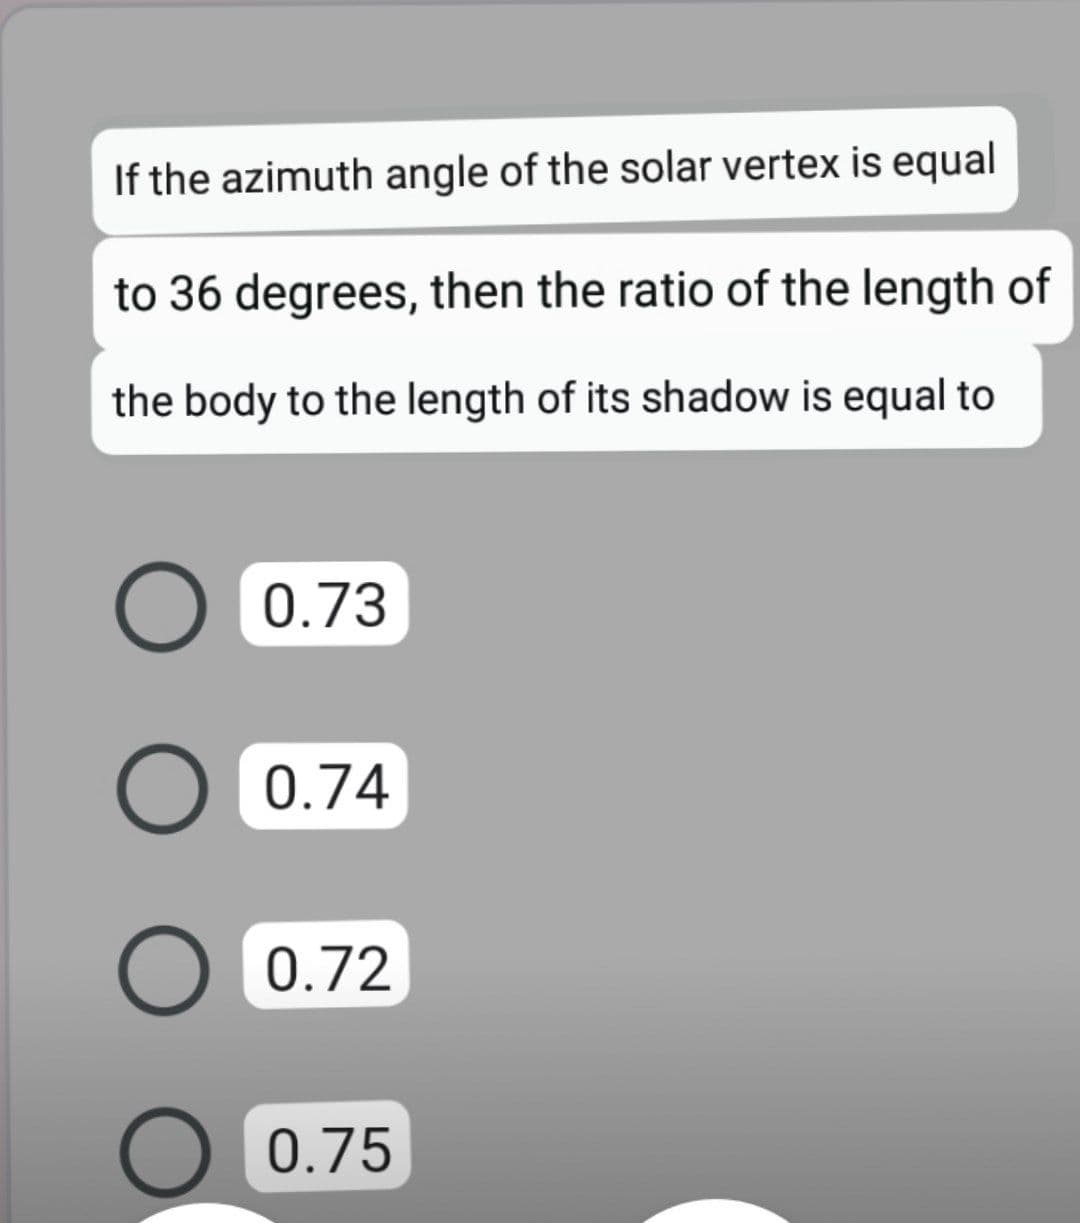 If the azimuth angle of the solar vertex is equal
to 36 degrees, then the ratio of the length of
the body to the length of its shadow is equal to
O 0.73
0.74
0.72
0.75